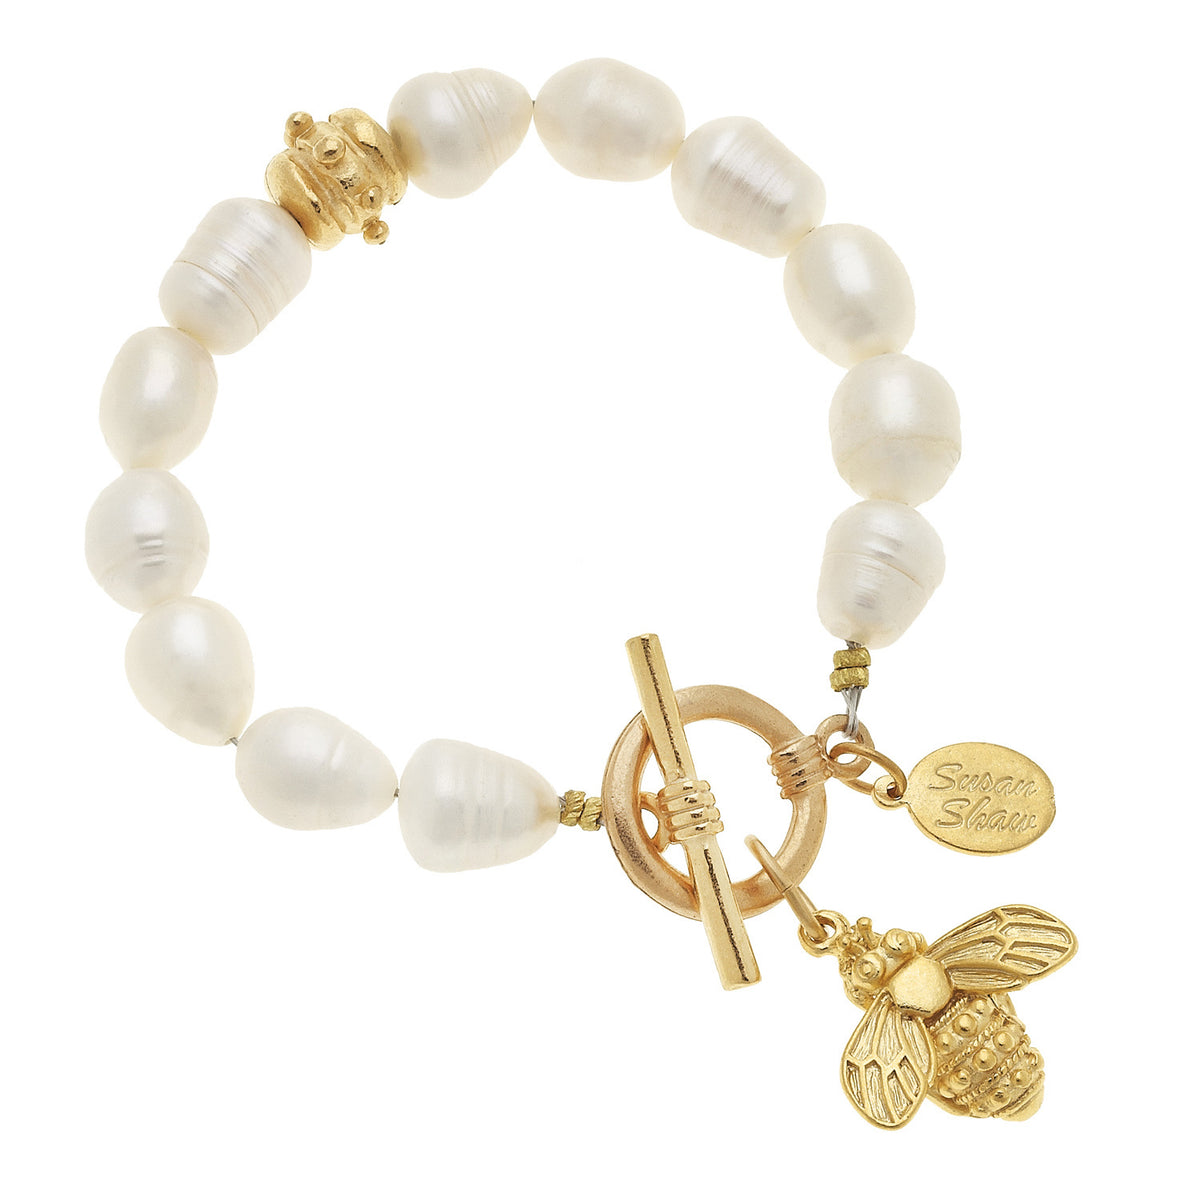 Susan Shaw Pearl Bee Charm Bracelet, Handcast Genuine Freshwater Pearl, Gold Plated Tennis Style 8"